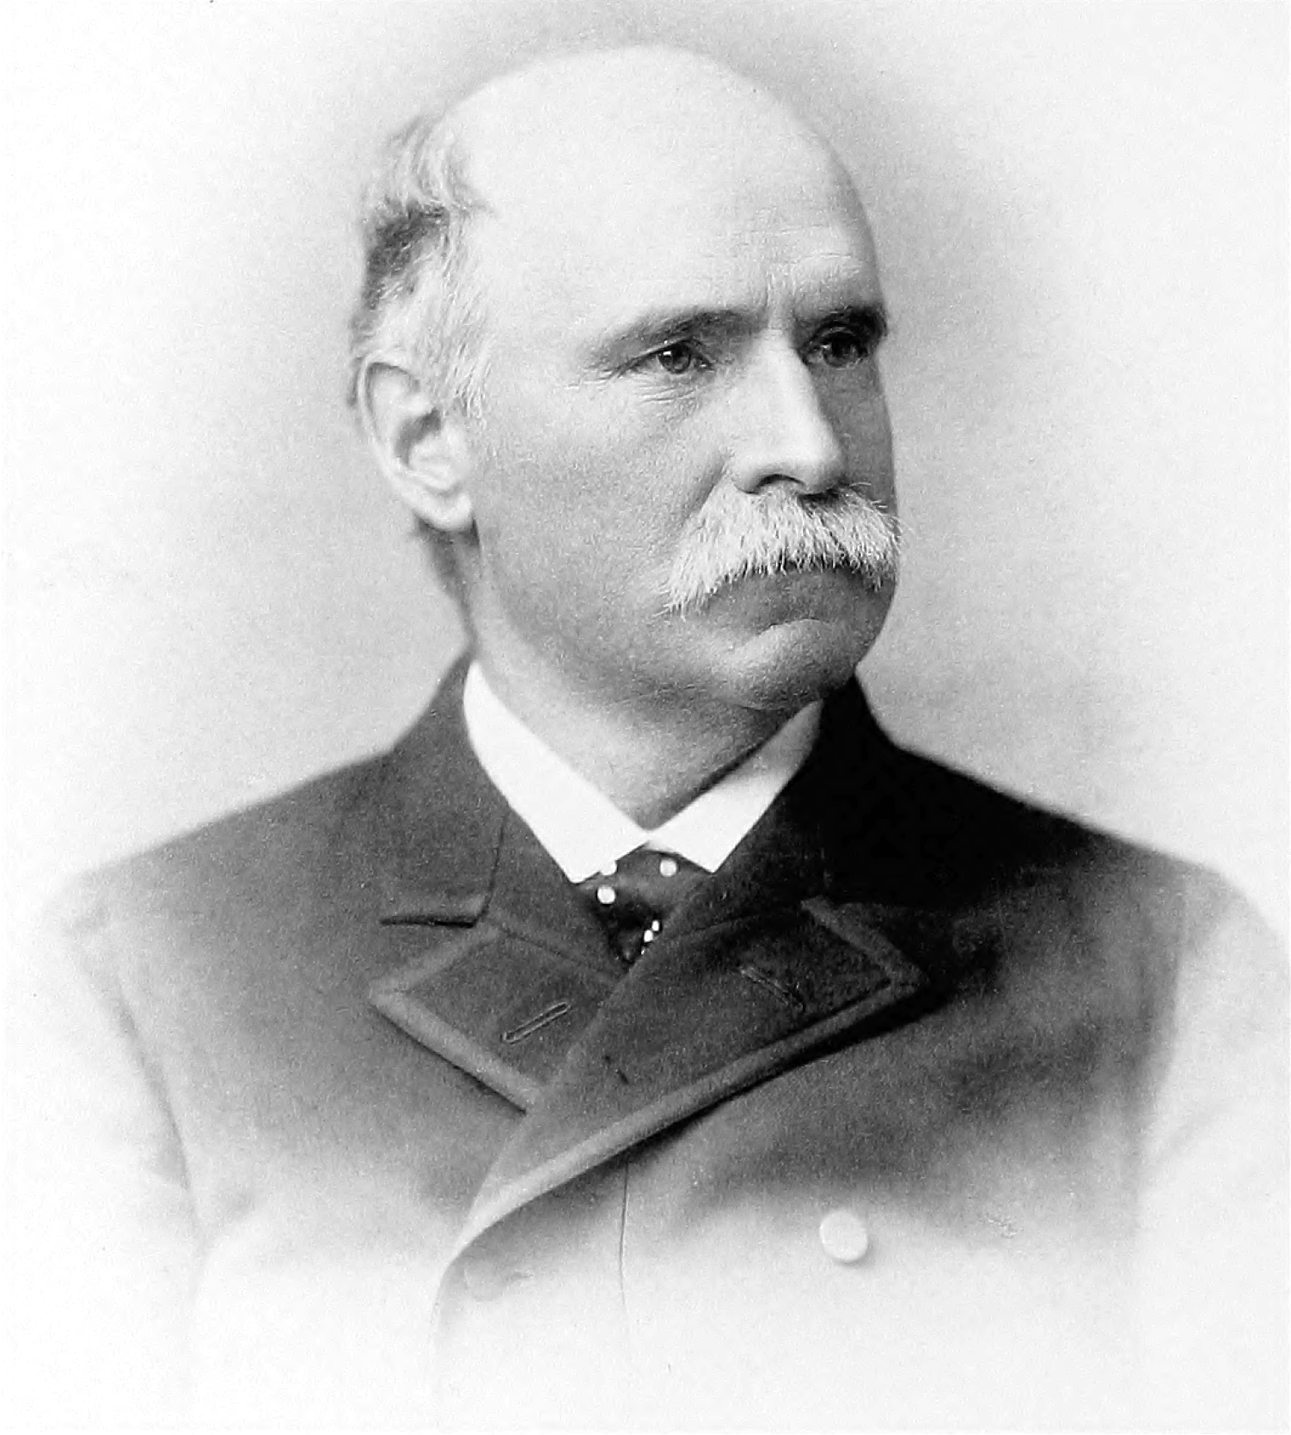 Black and white portrait photograph of Anthony J. Drexel.